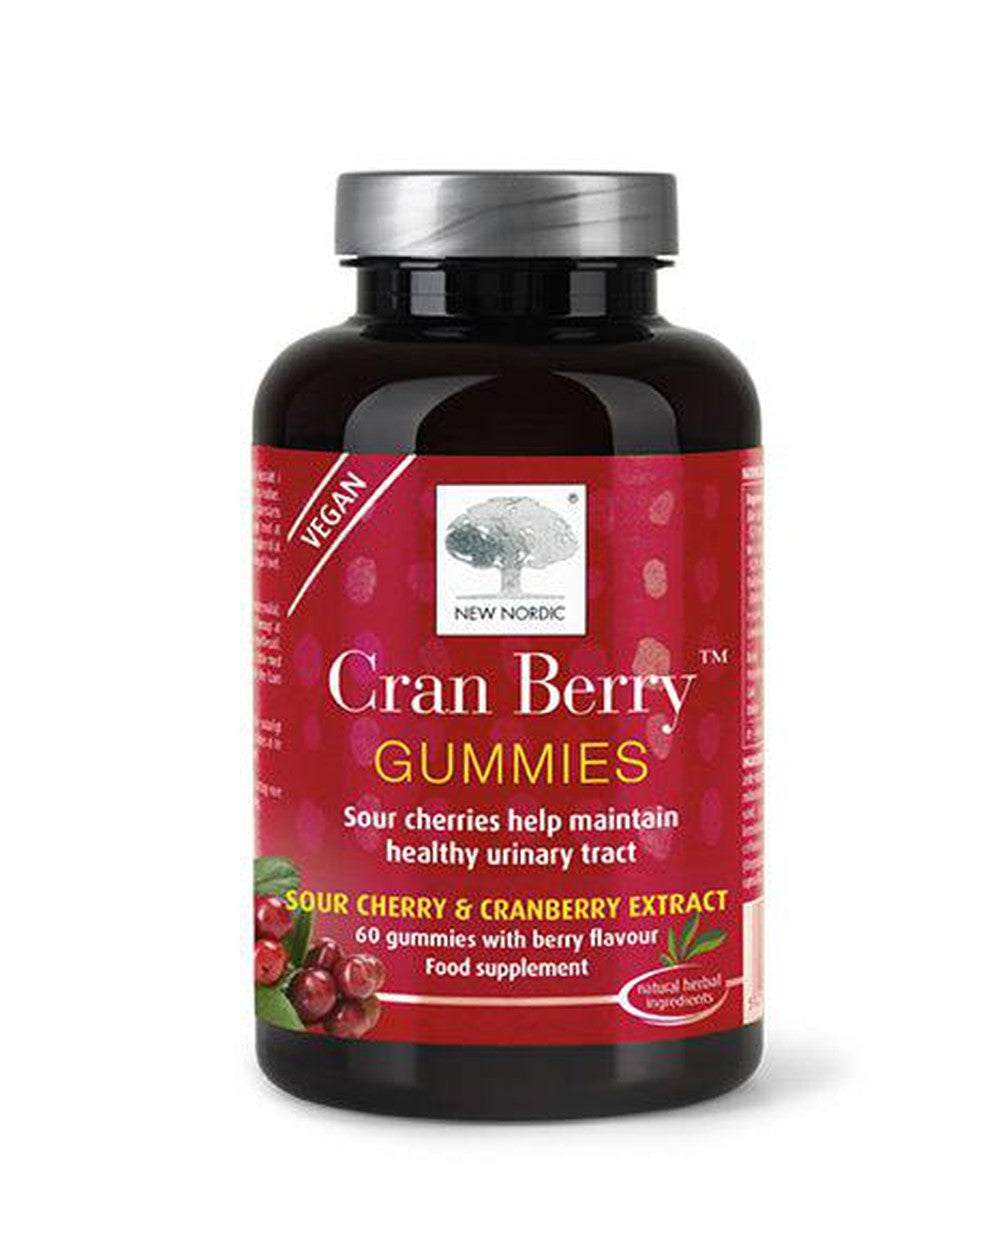 New Nordic Cran Berry Gummies 60 Gummies- Lillys Pharmacy and Health Store